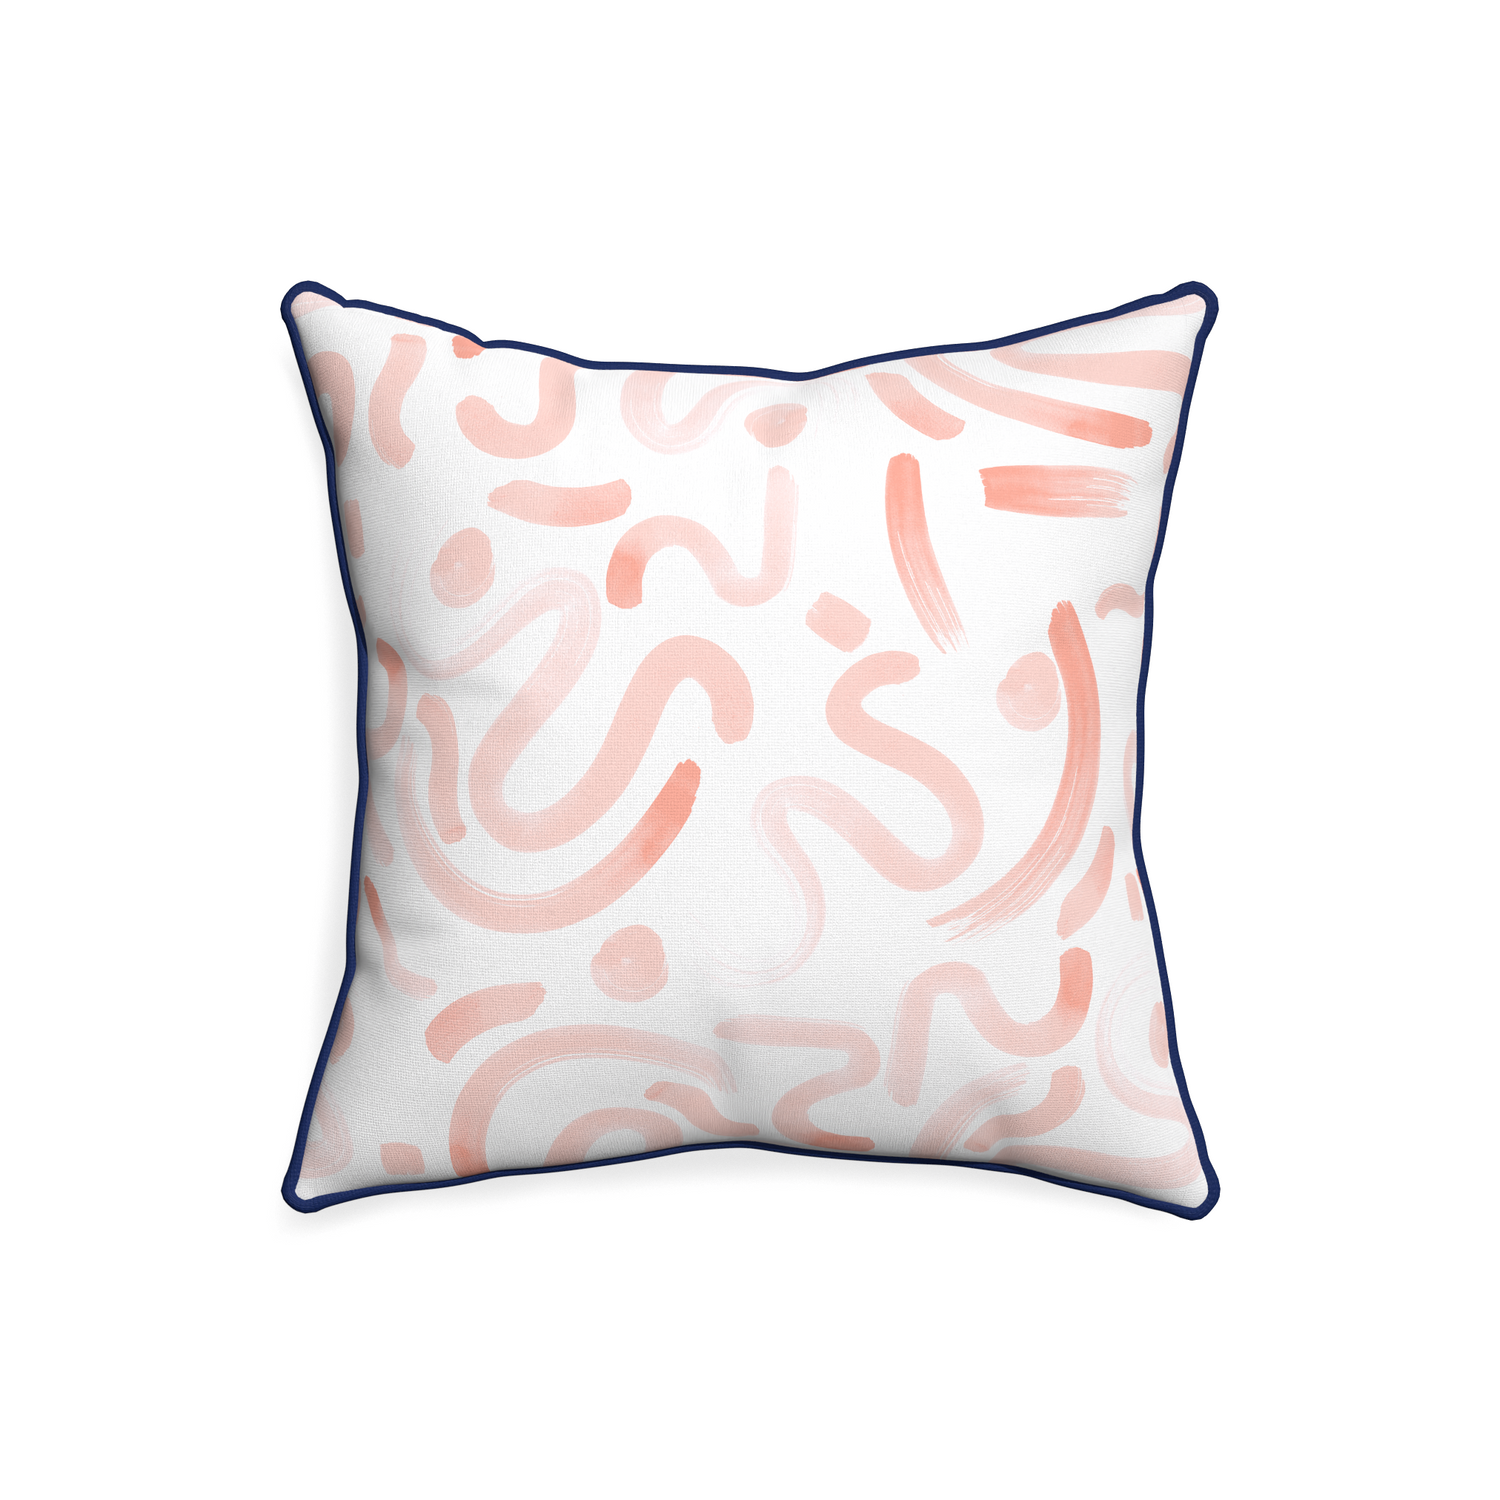 20-square hockney pink custom pink graphicpillow with midnight piping on white background